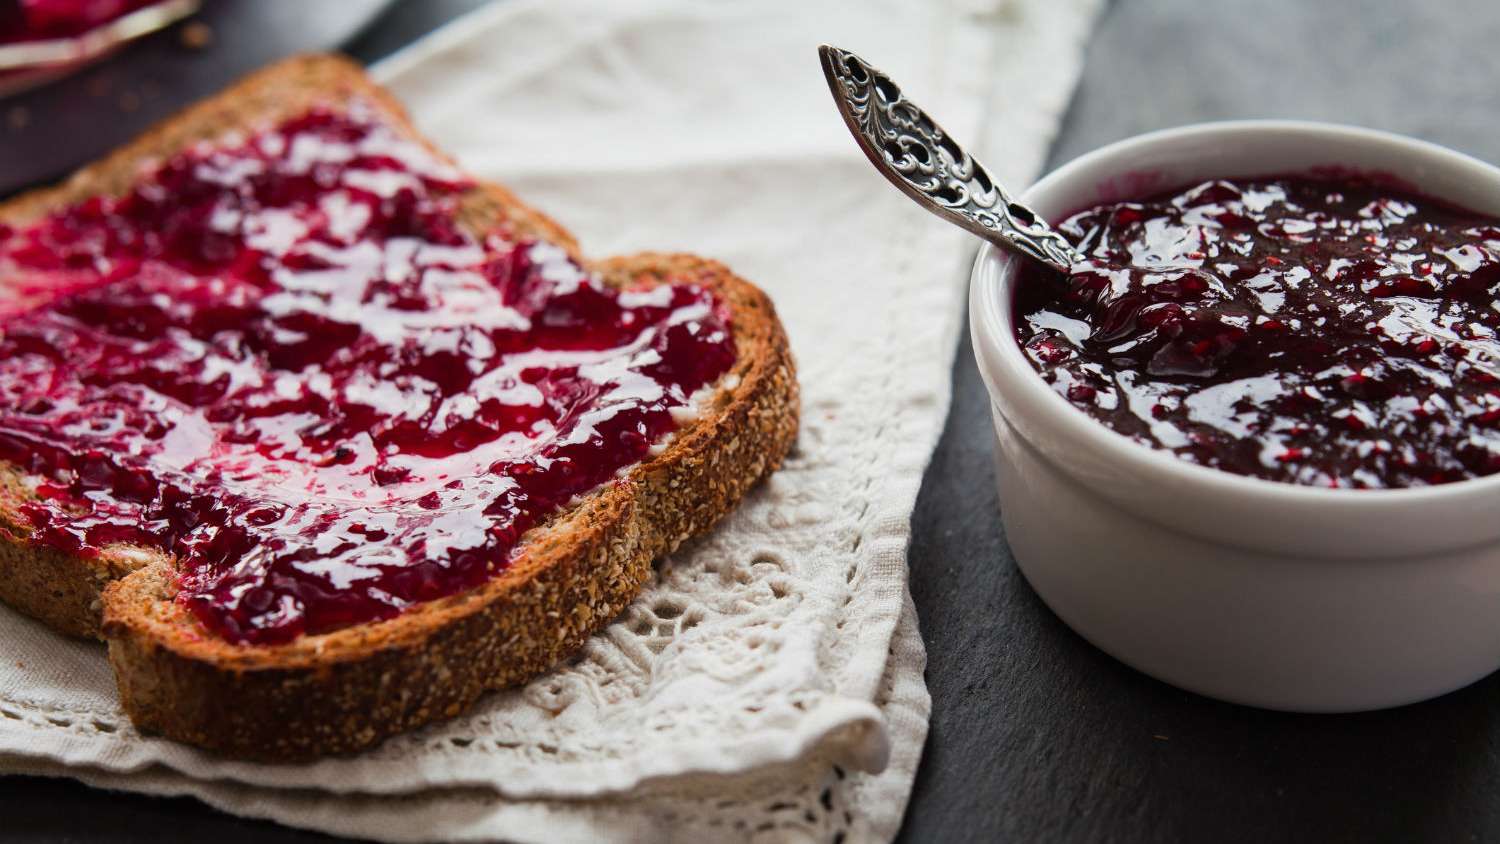 Settle These Food Debates and We’ll Guess Which Three Foods You Love the Most jelly spread